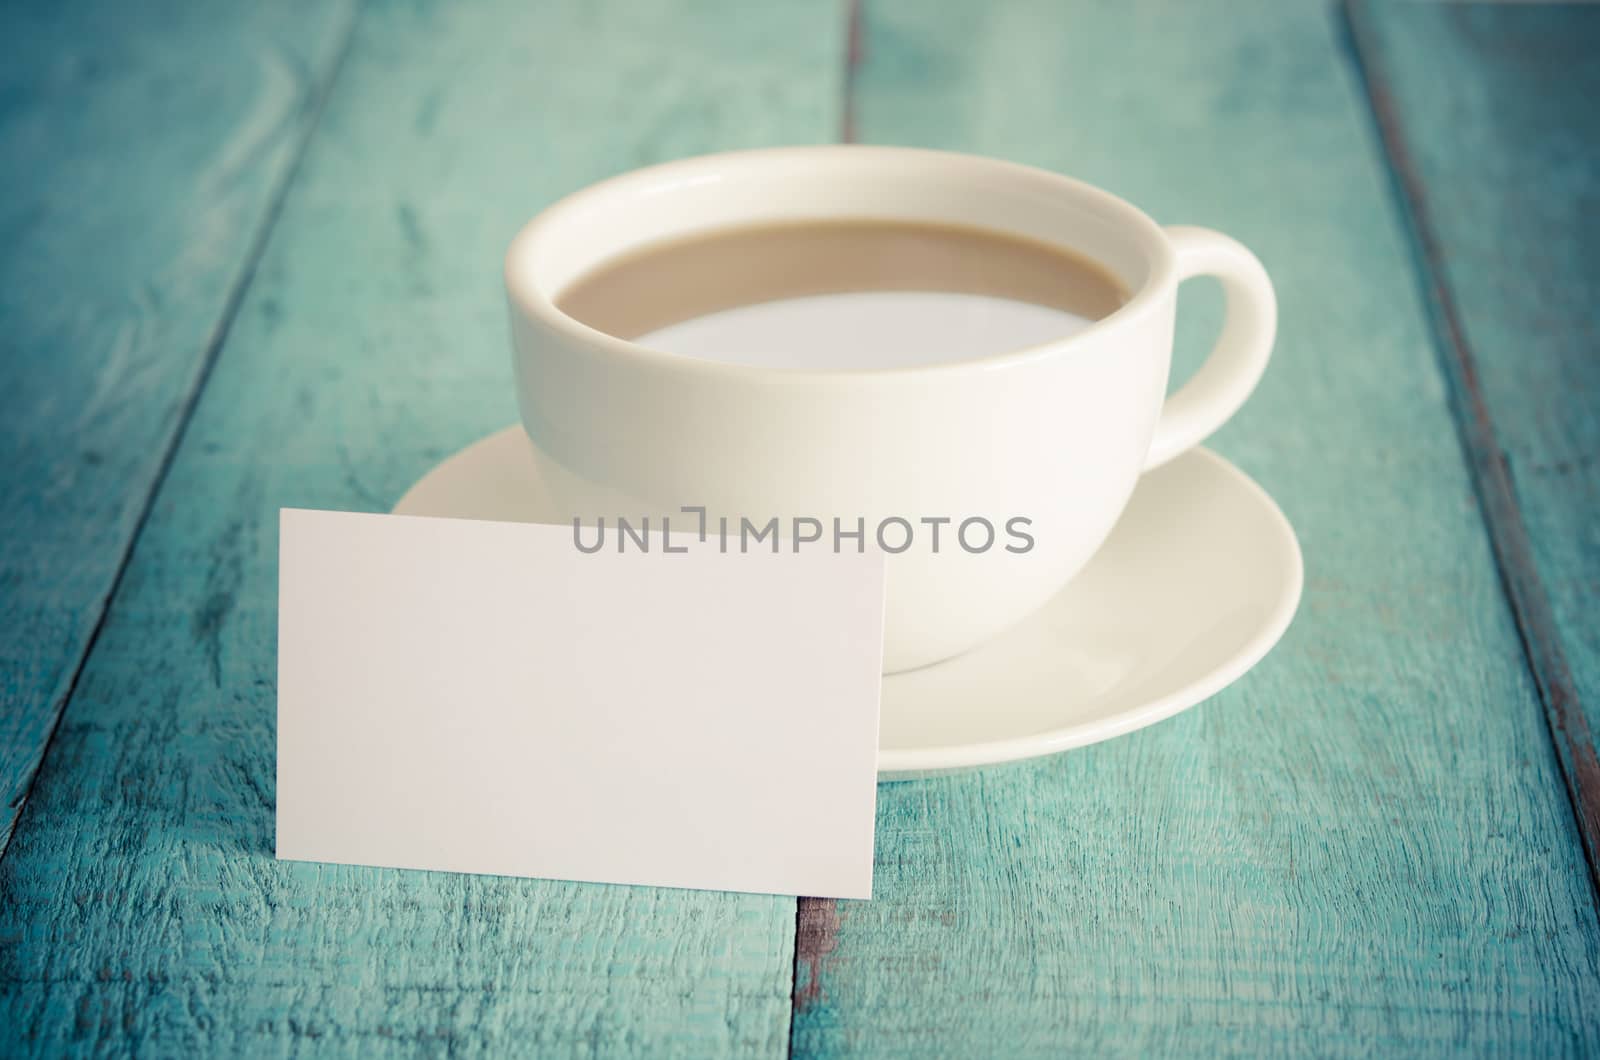 Blank business card and cup of coffee on blue wooden table. Vintage filter.